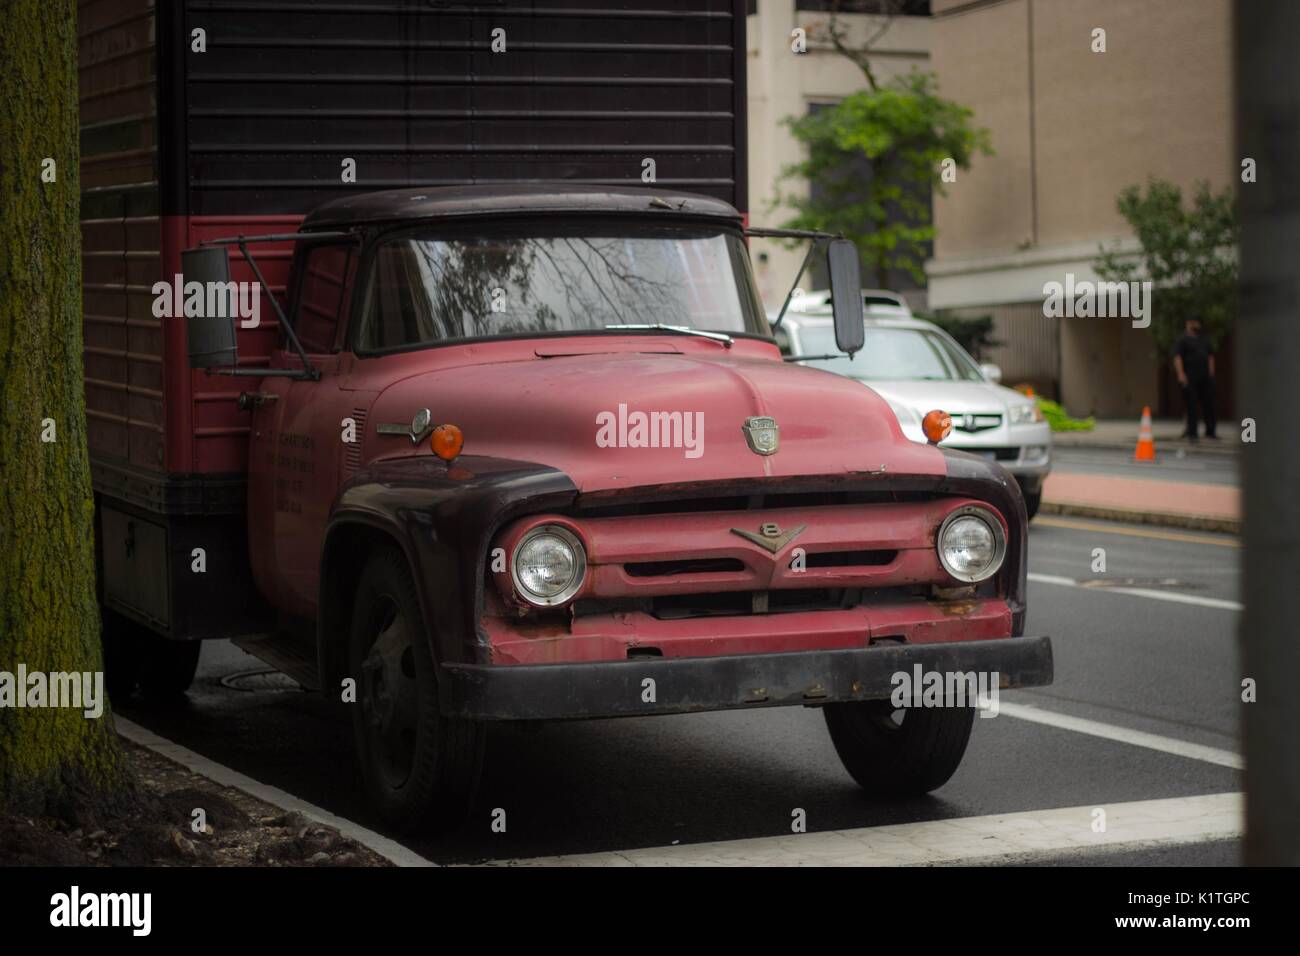 An old truck found in downtown. Used in a Steven Spielberg movie that has yet to be released. Stock Photo